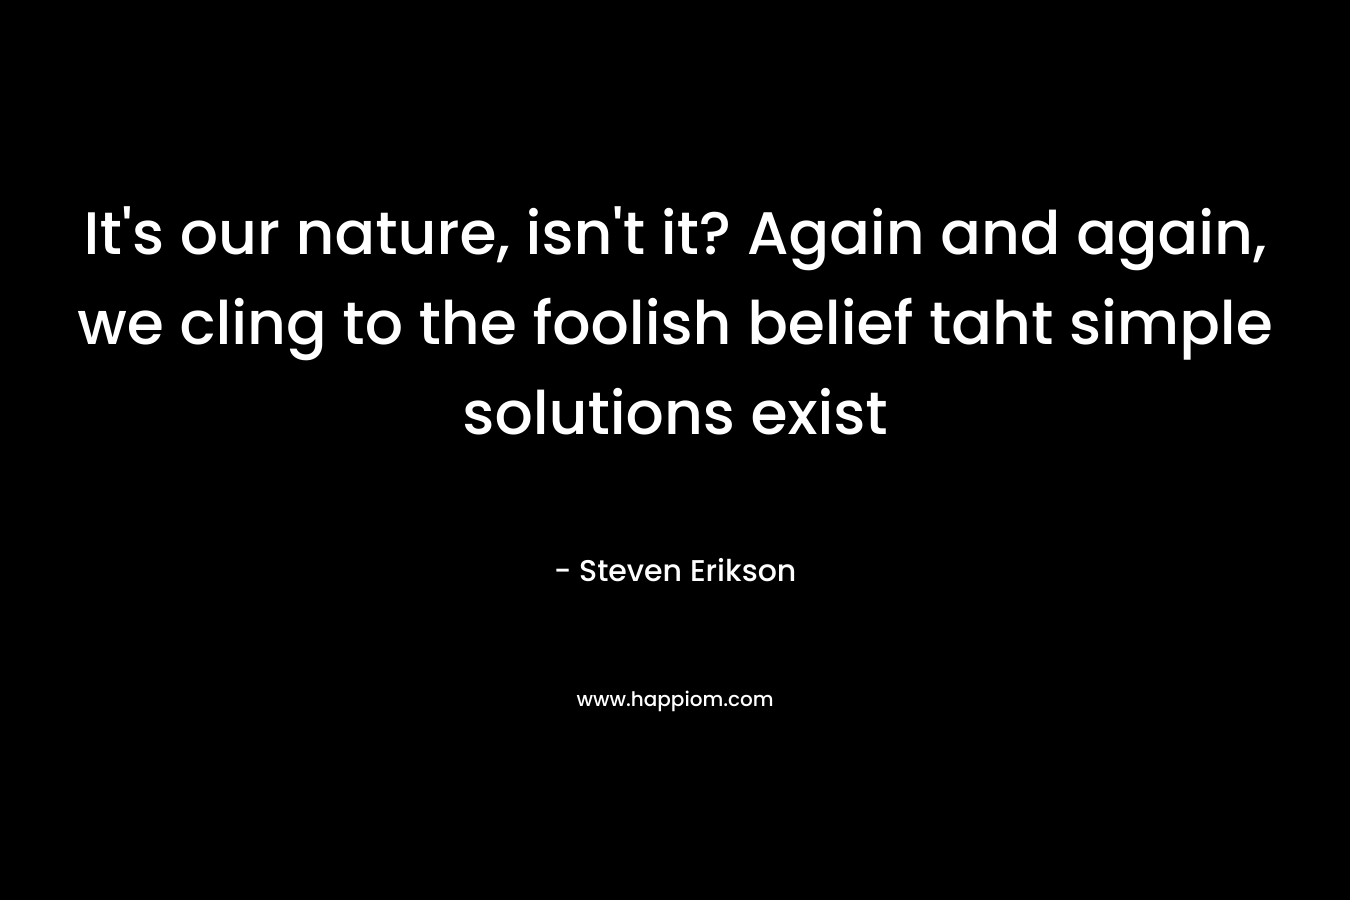 It's our nature, isn't it? Again and again, we cling to the foolish belief taht simple solutions exist